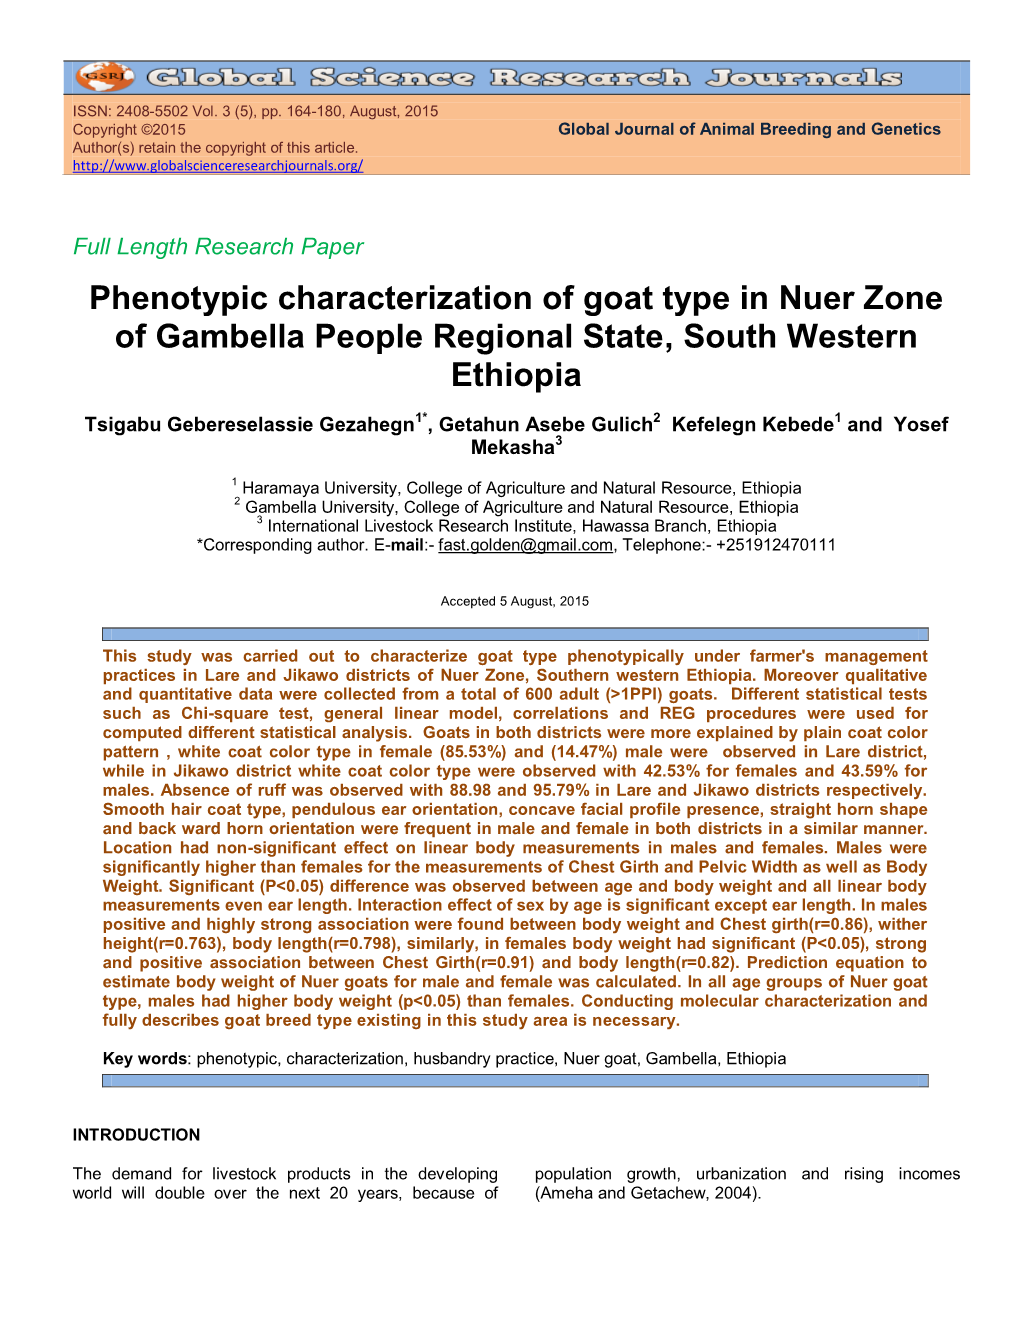 Phenotypic Characterization of Goat Type in Nuer Zone of Gambella People Regional State, South Western Ethiopia